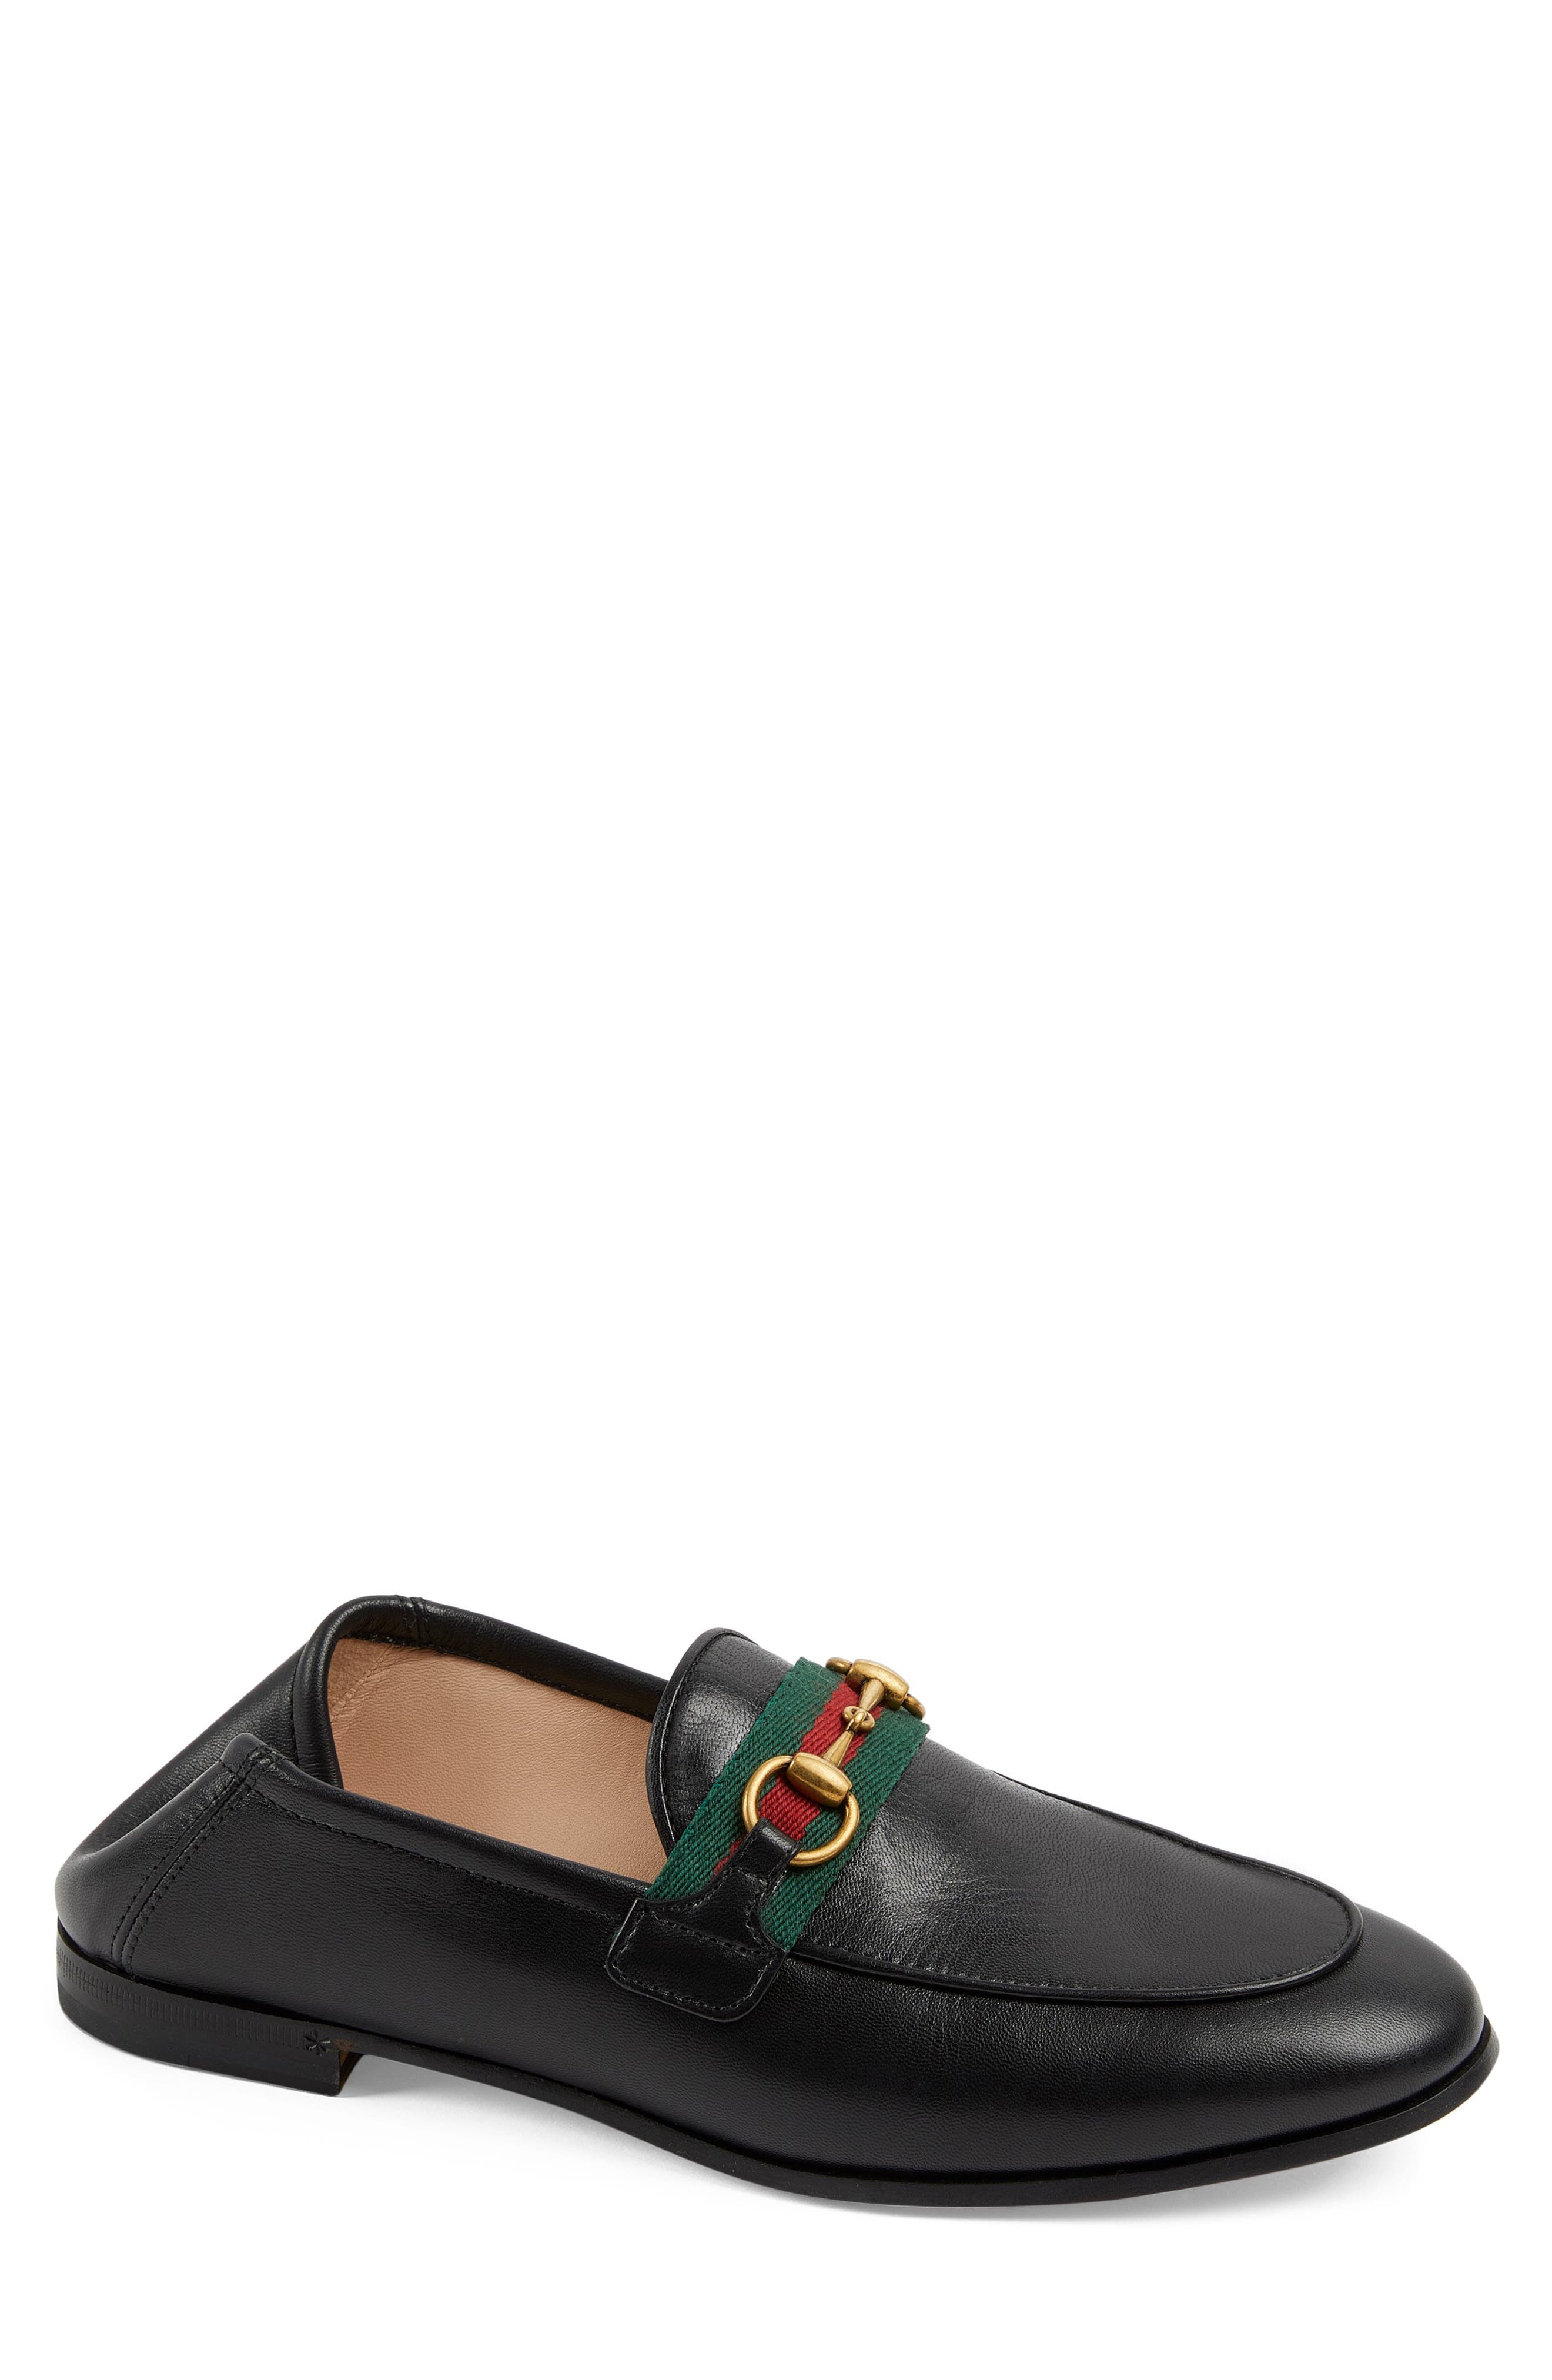 gucci loafers female